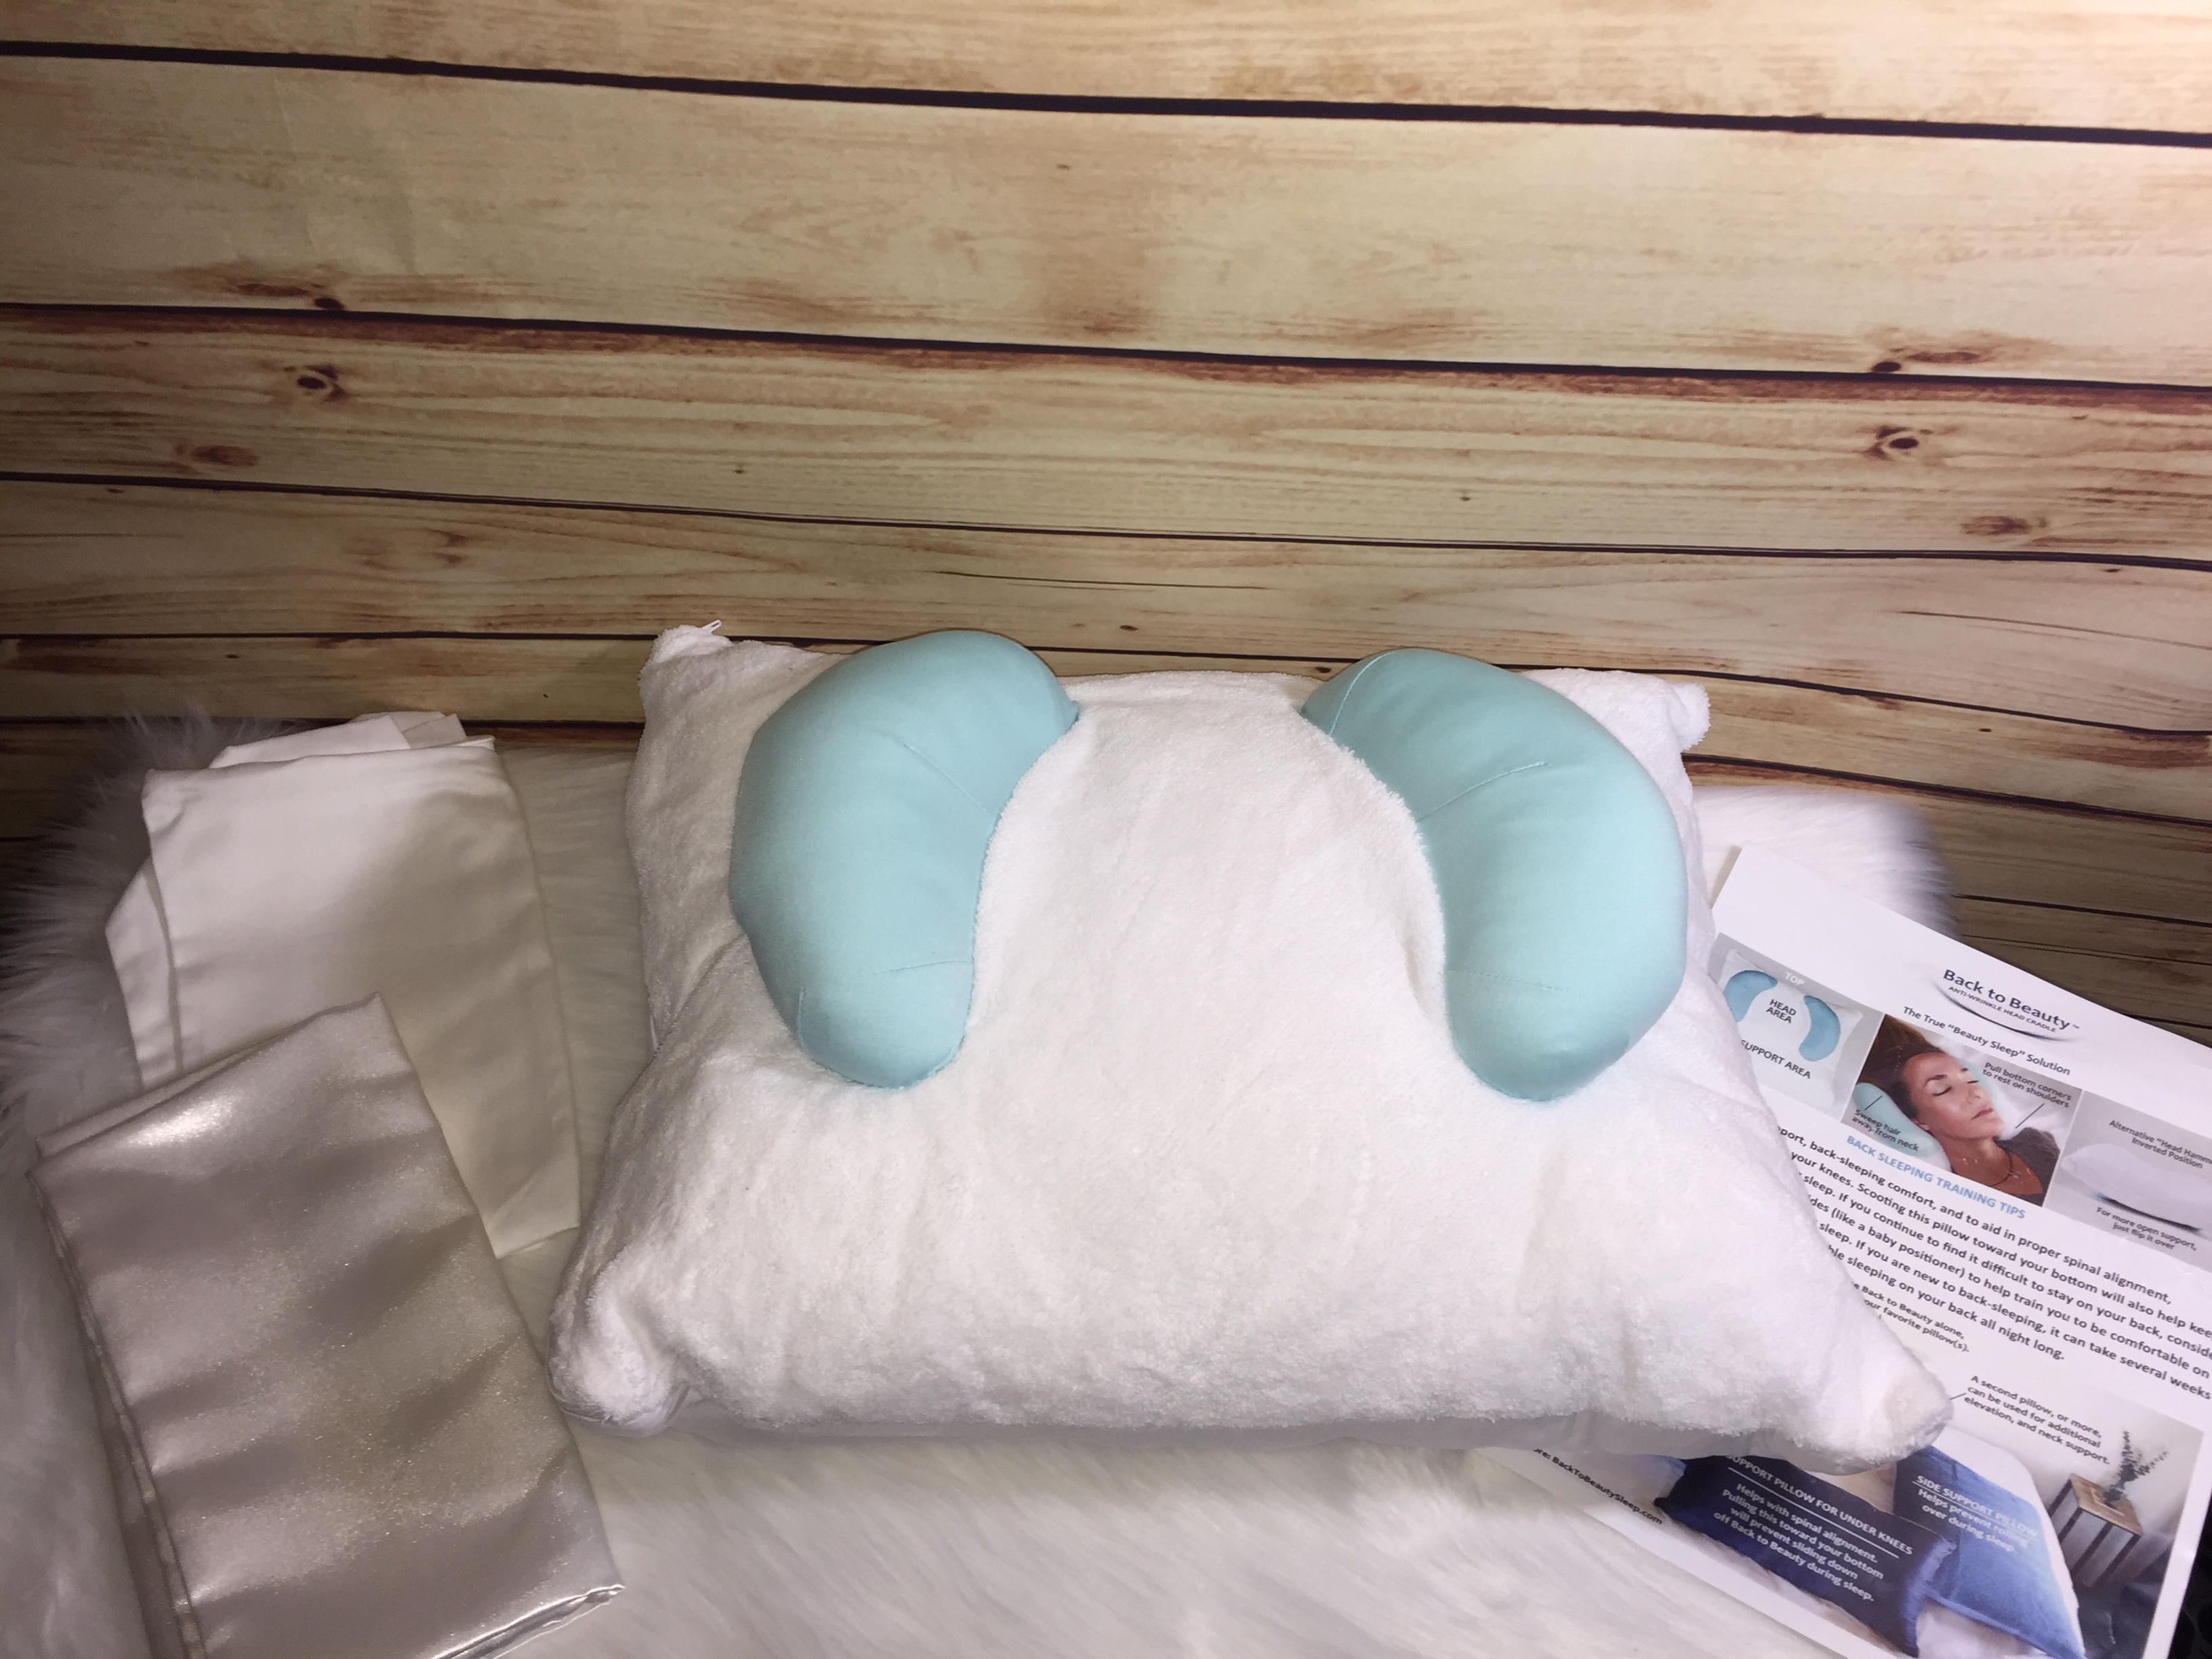 pillow that makes you sleep on your back